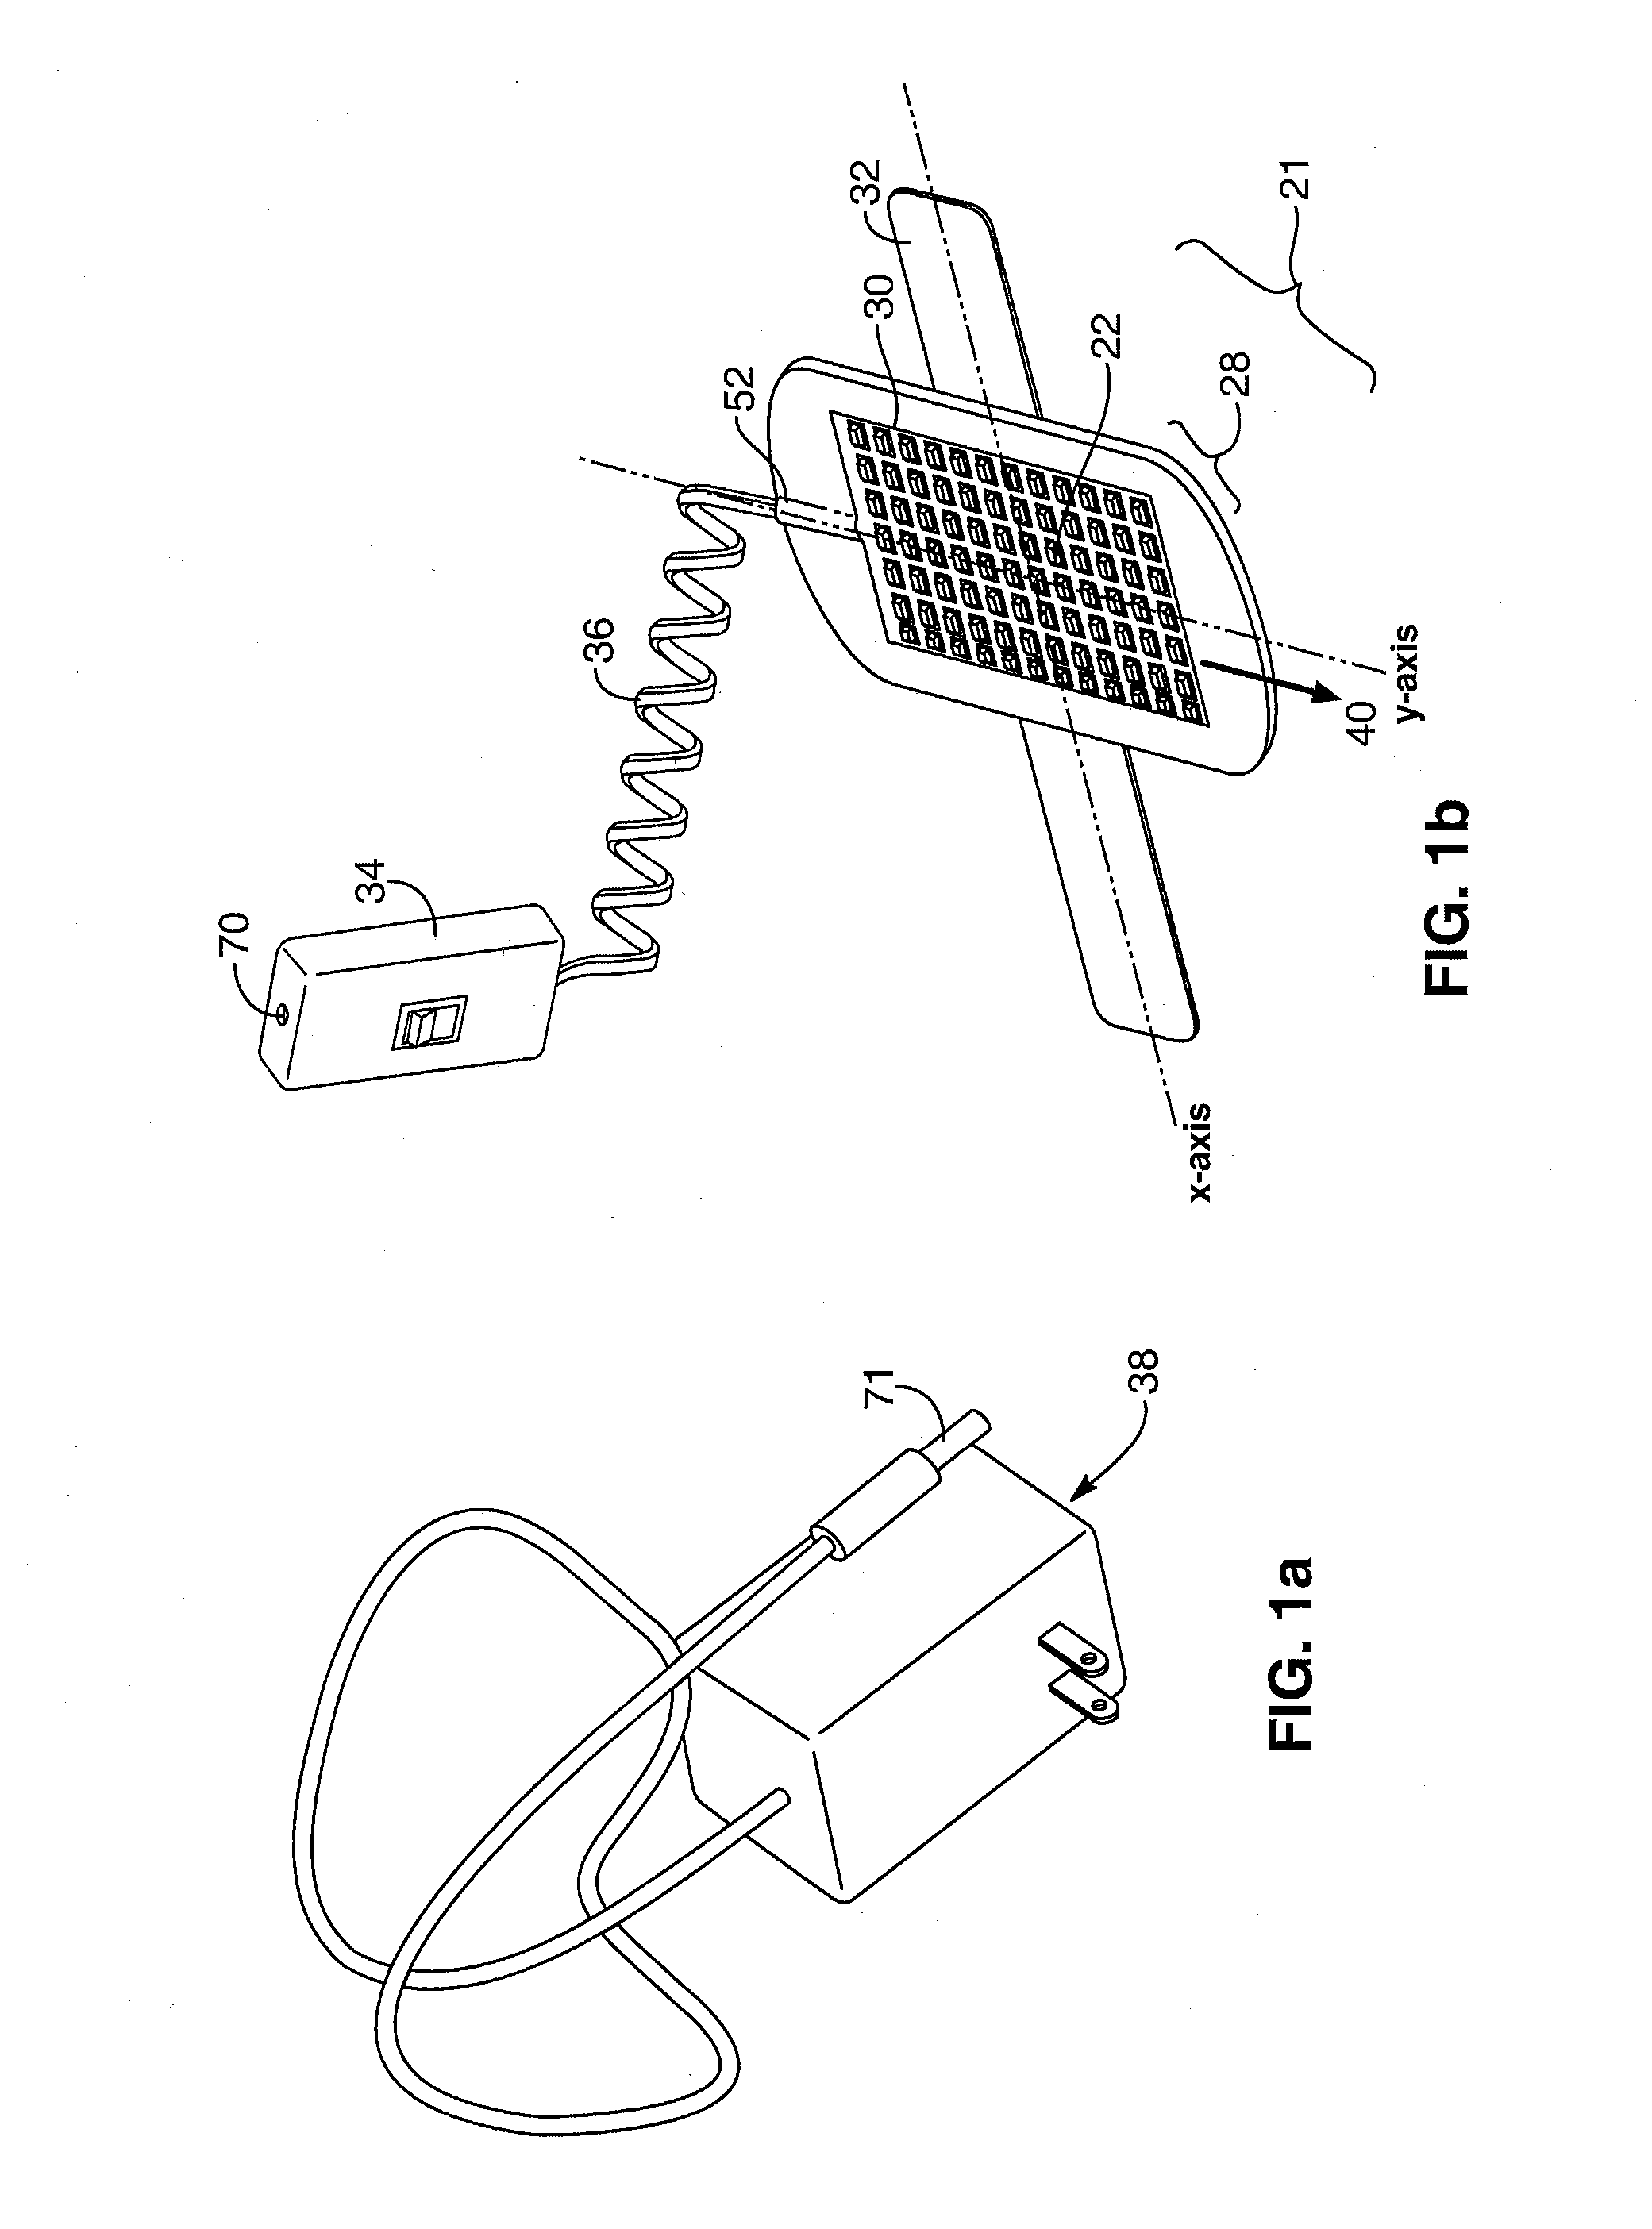 Method and Apparatus for Bi-Axial Light Treatment